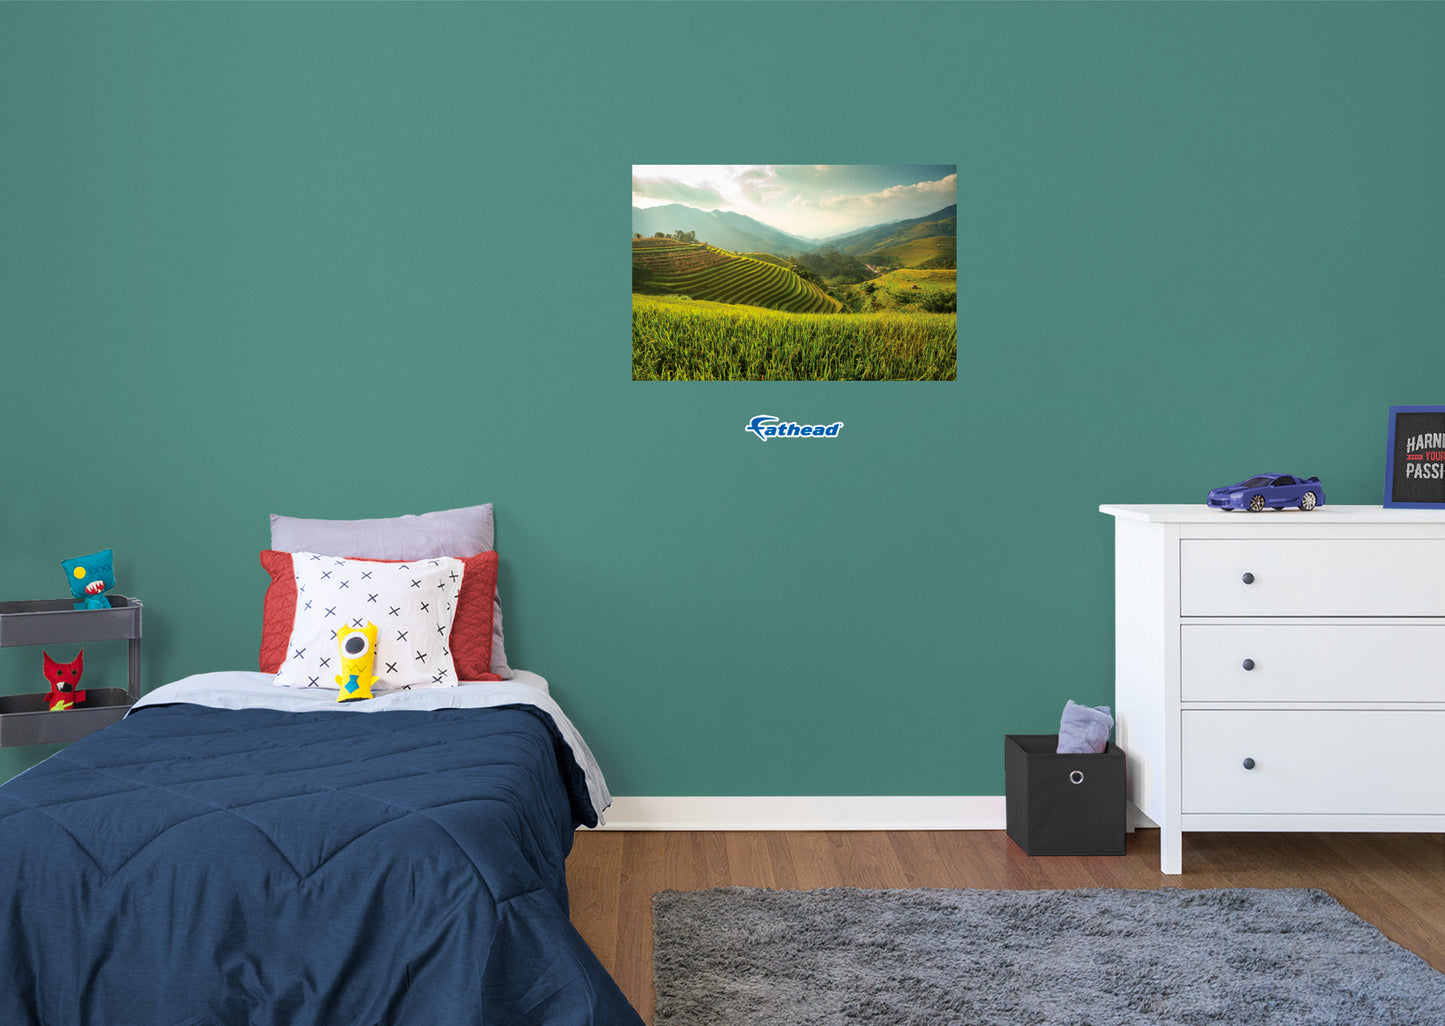 Generic Scenery: Golden Fields Poster        -   Removable     Adhesive Decal